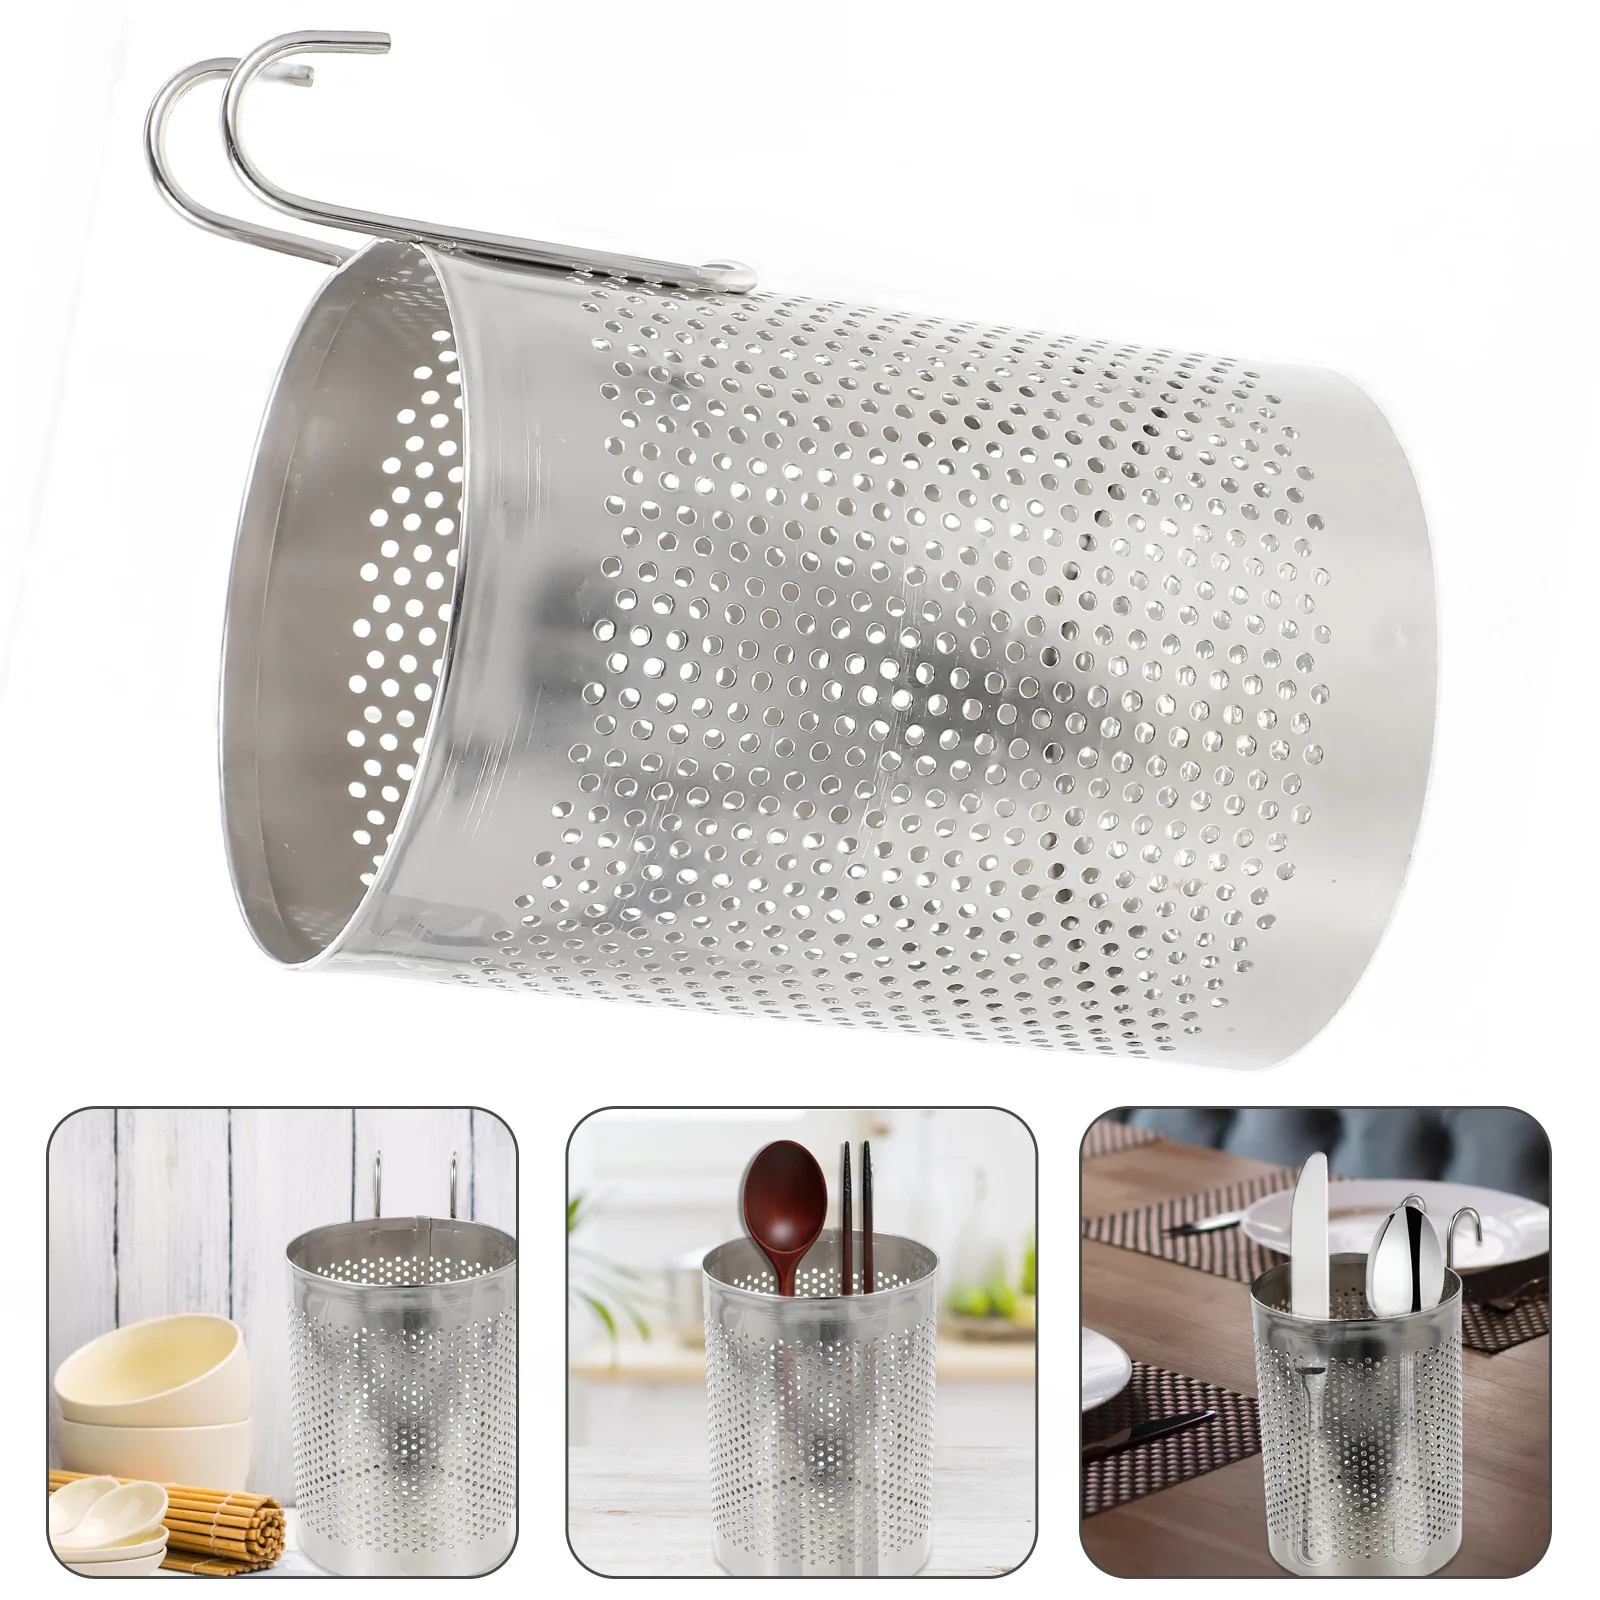 Daily Use Chopstick Drainer Mesh Design Utensil Drying Rack Sturdy Stainless Steel Cutlery Holder